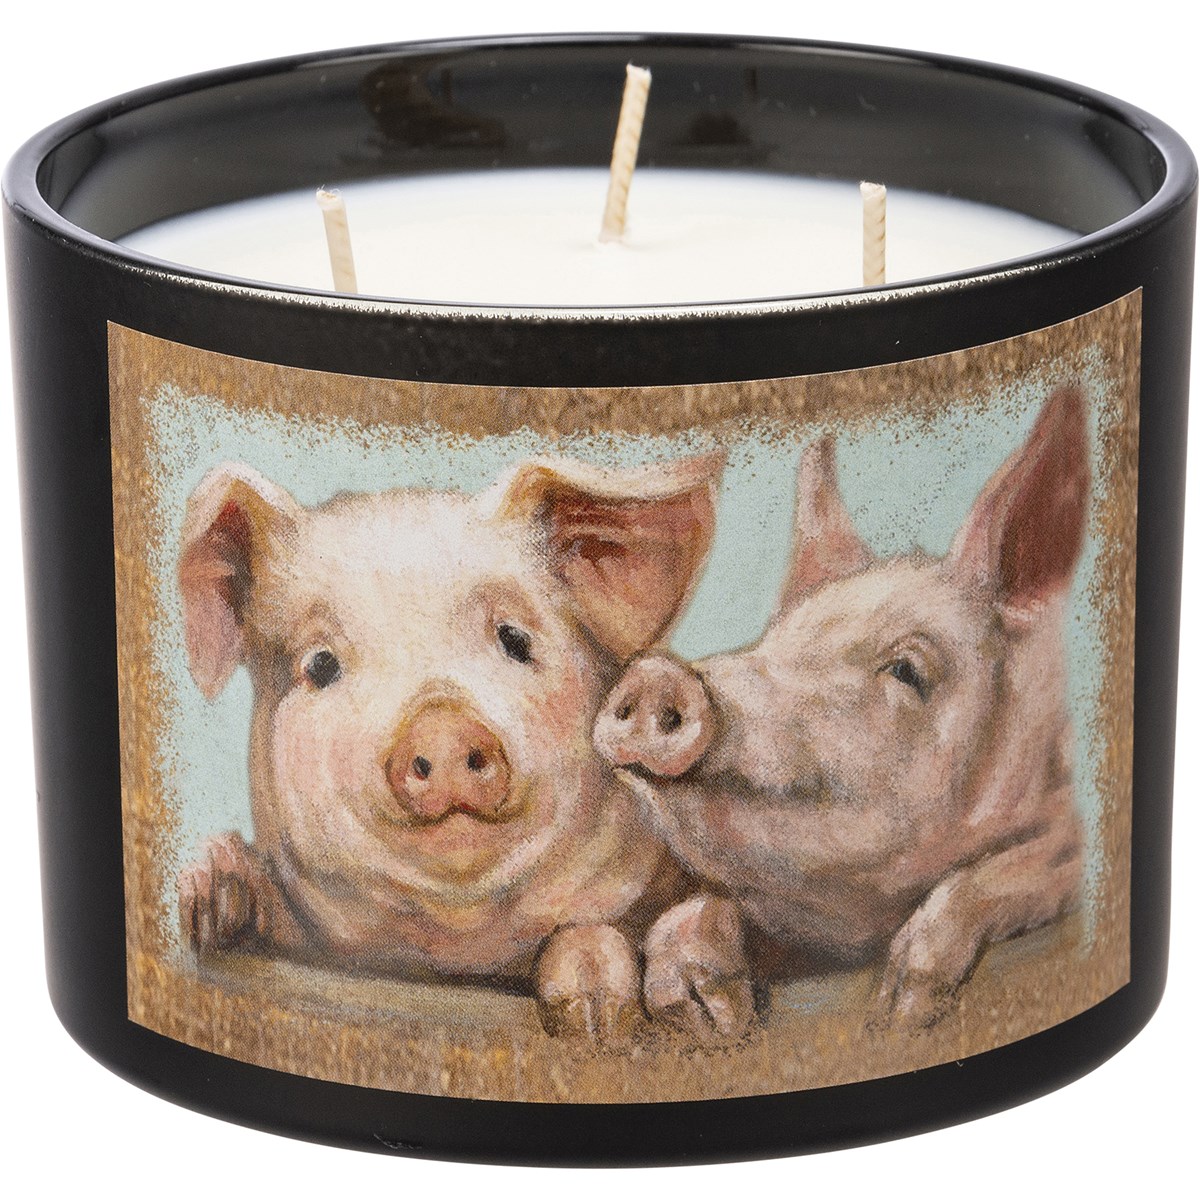 Pigs Candle - Soy Wax, Glass, Cotton